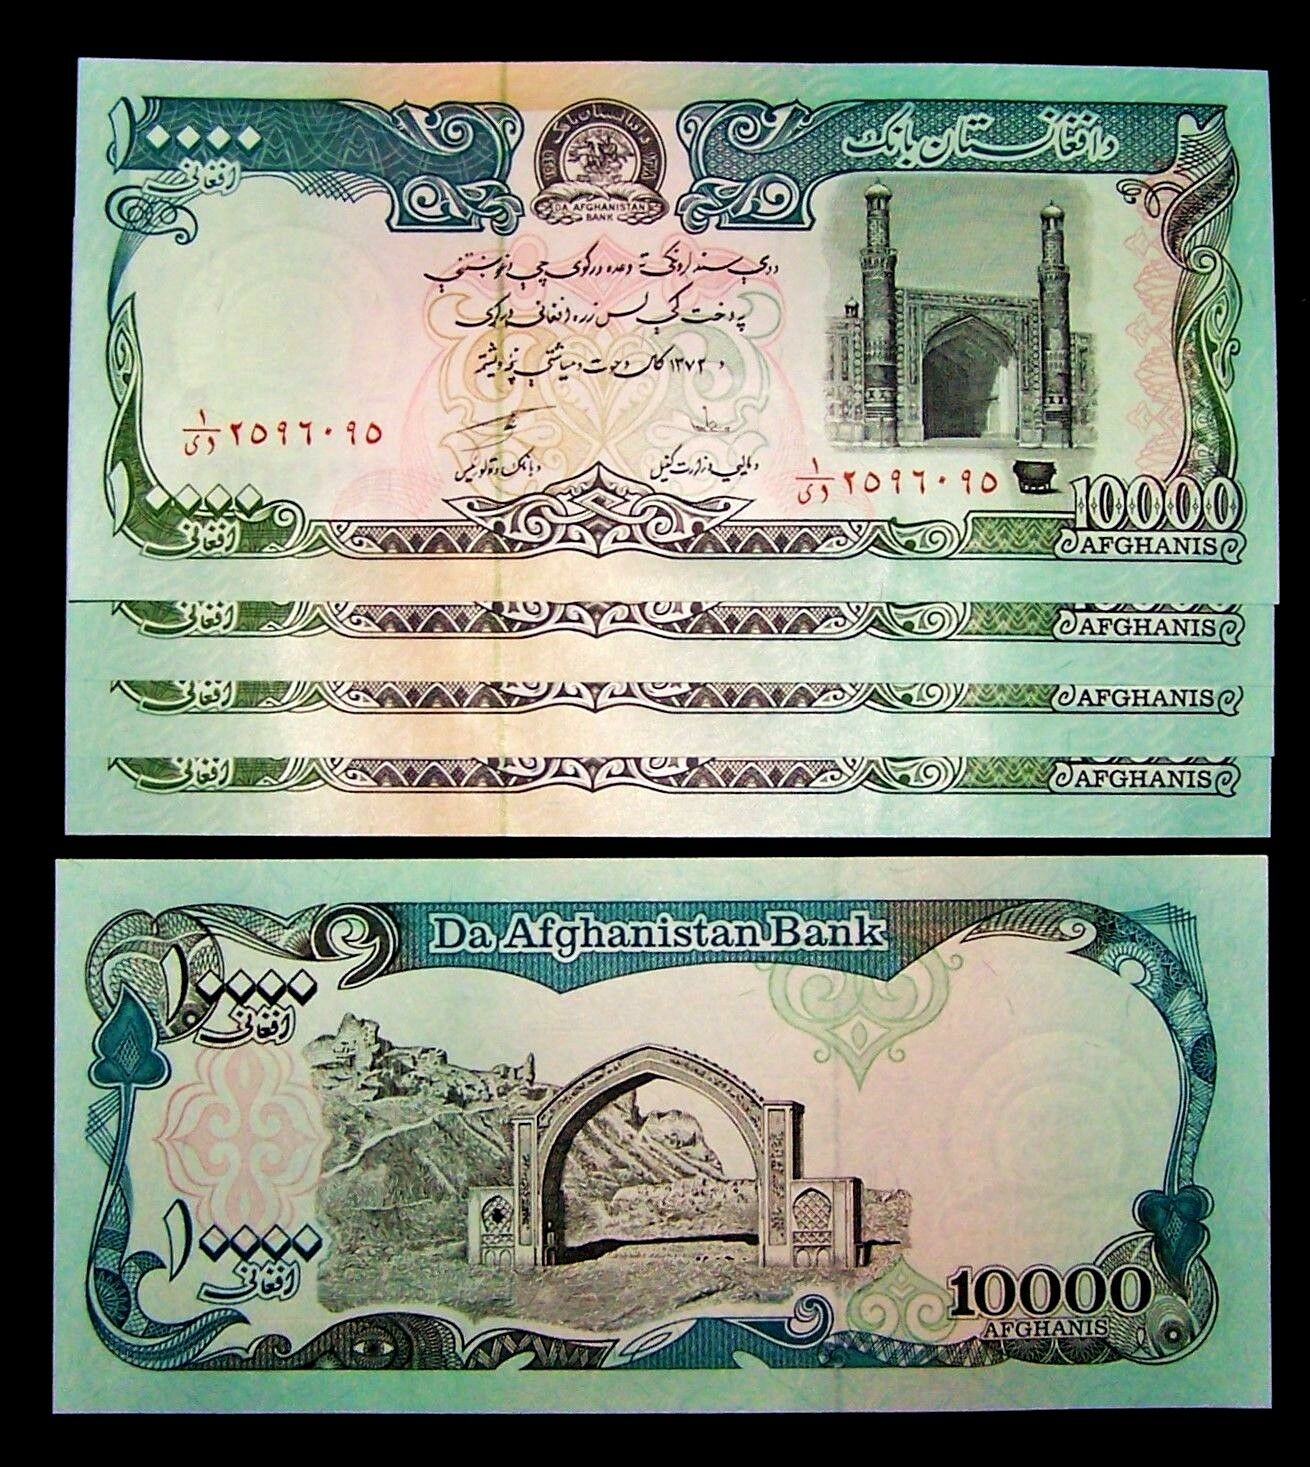 5 X Afghanistan 10000 (10,000) Afghanis Unc Paper Money Currency